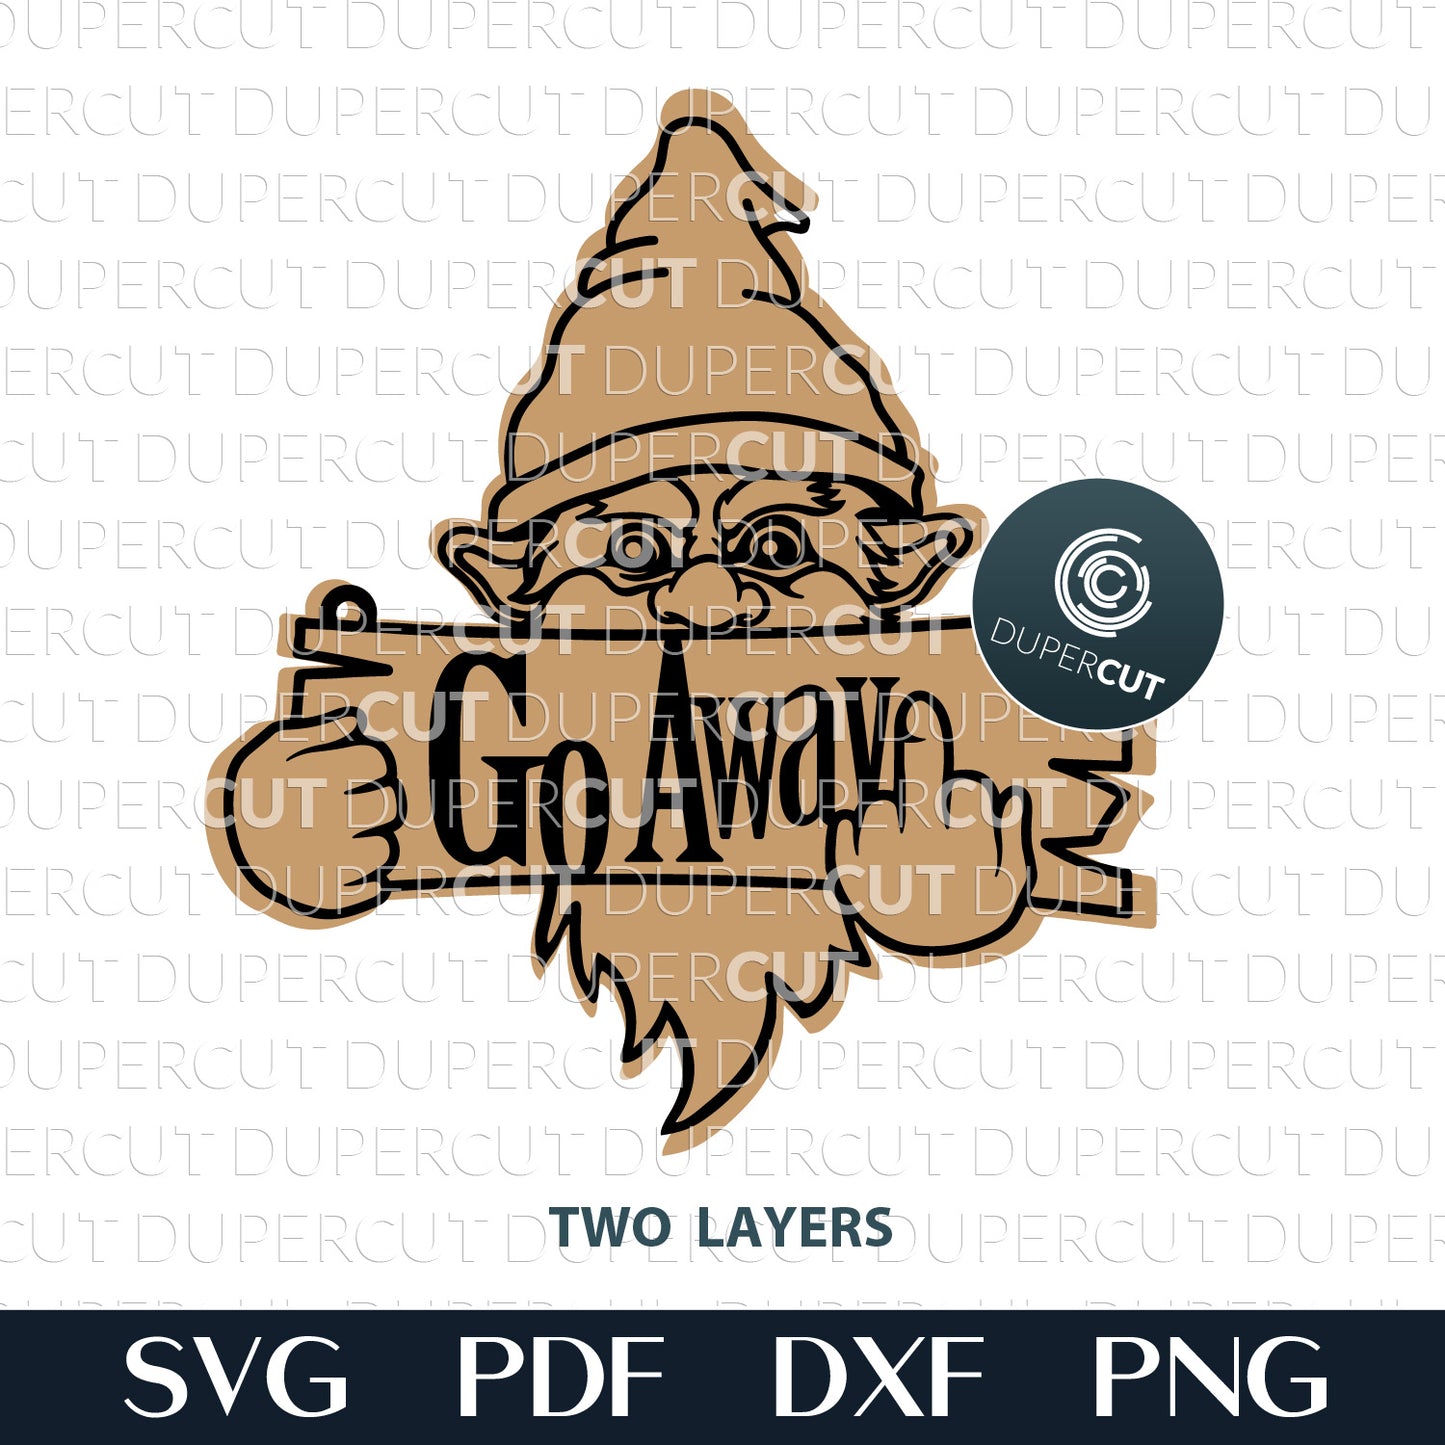 Naughty gnome giving a finger "Go Away" sign door hanger, SVG DXF layered laser cutting files for Glowforge, Cricut, Xtool, CNC plasma machines, scroll saw pattern by www.DuperCut.com